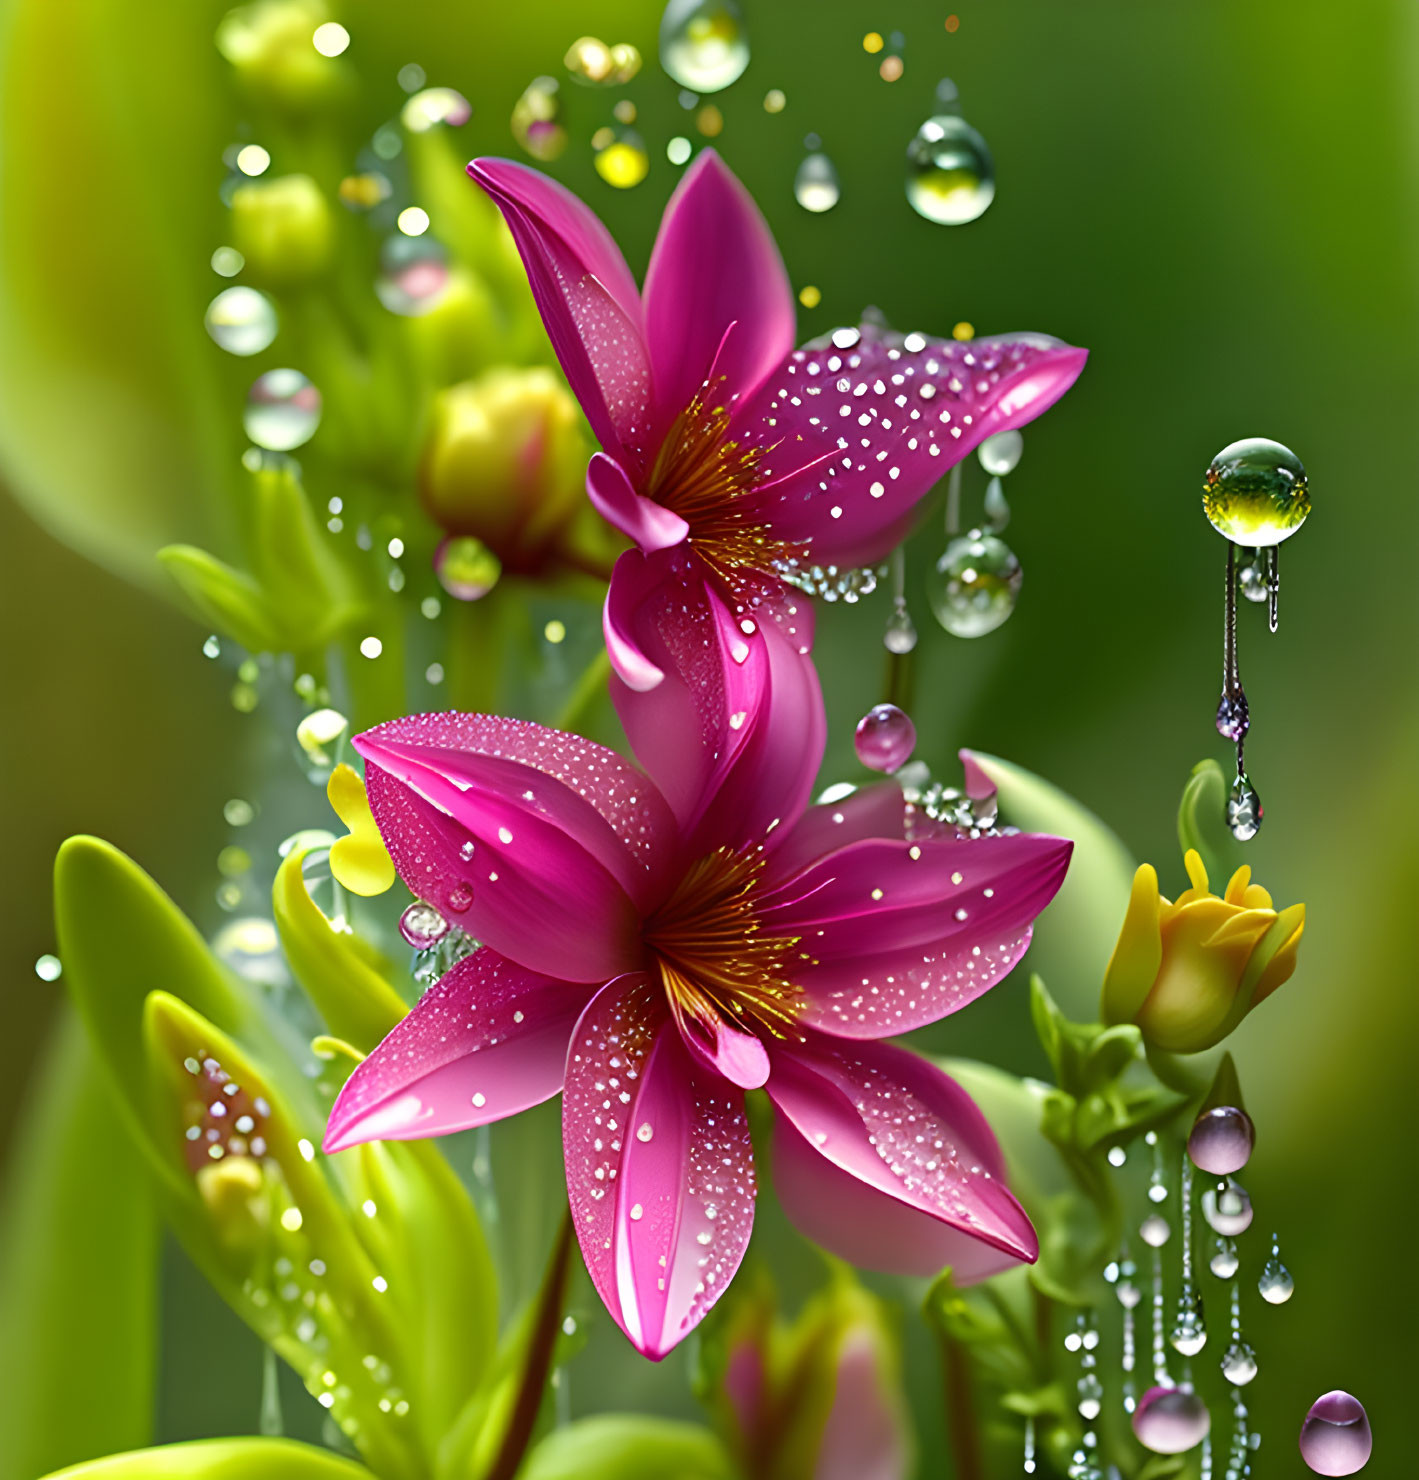 Pink flowers with water droplets in lush green setting